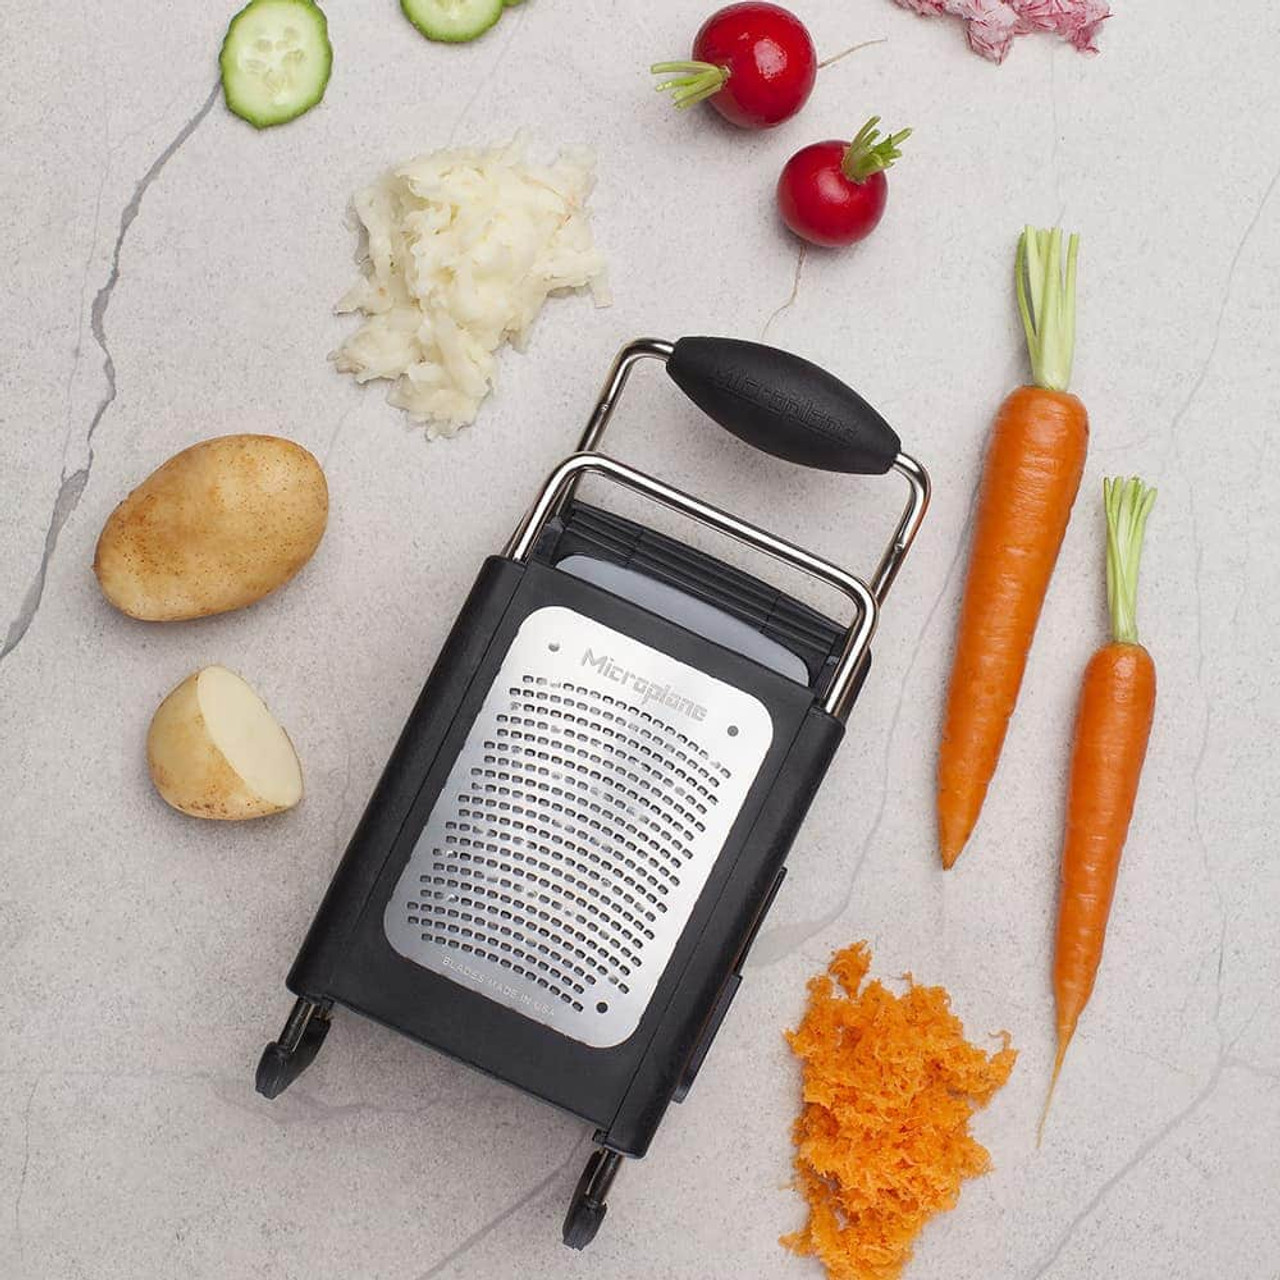 https://cdn11.bigcommerce.com/s-hccytny0od/images/stencil/1280x1280/products/1191/2752/microplane-4-sided-box-grater-1__66379.1512468677.jpg?c=2?imbypass=on